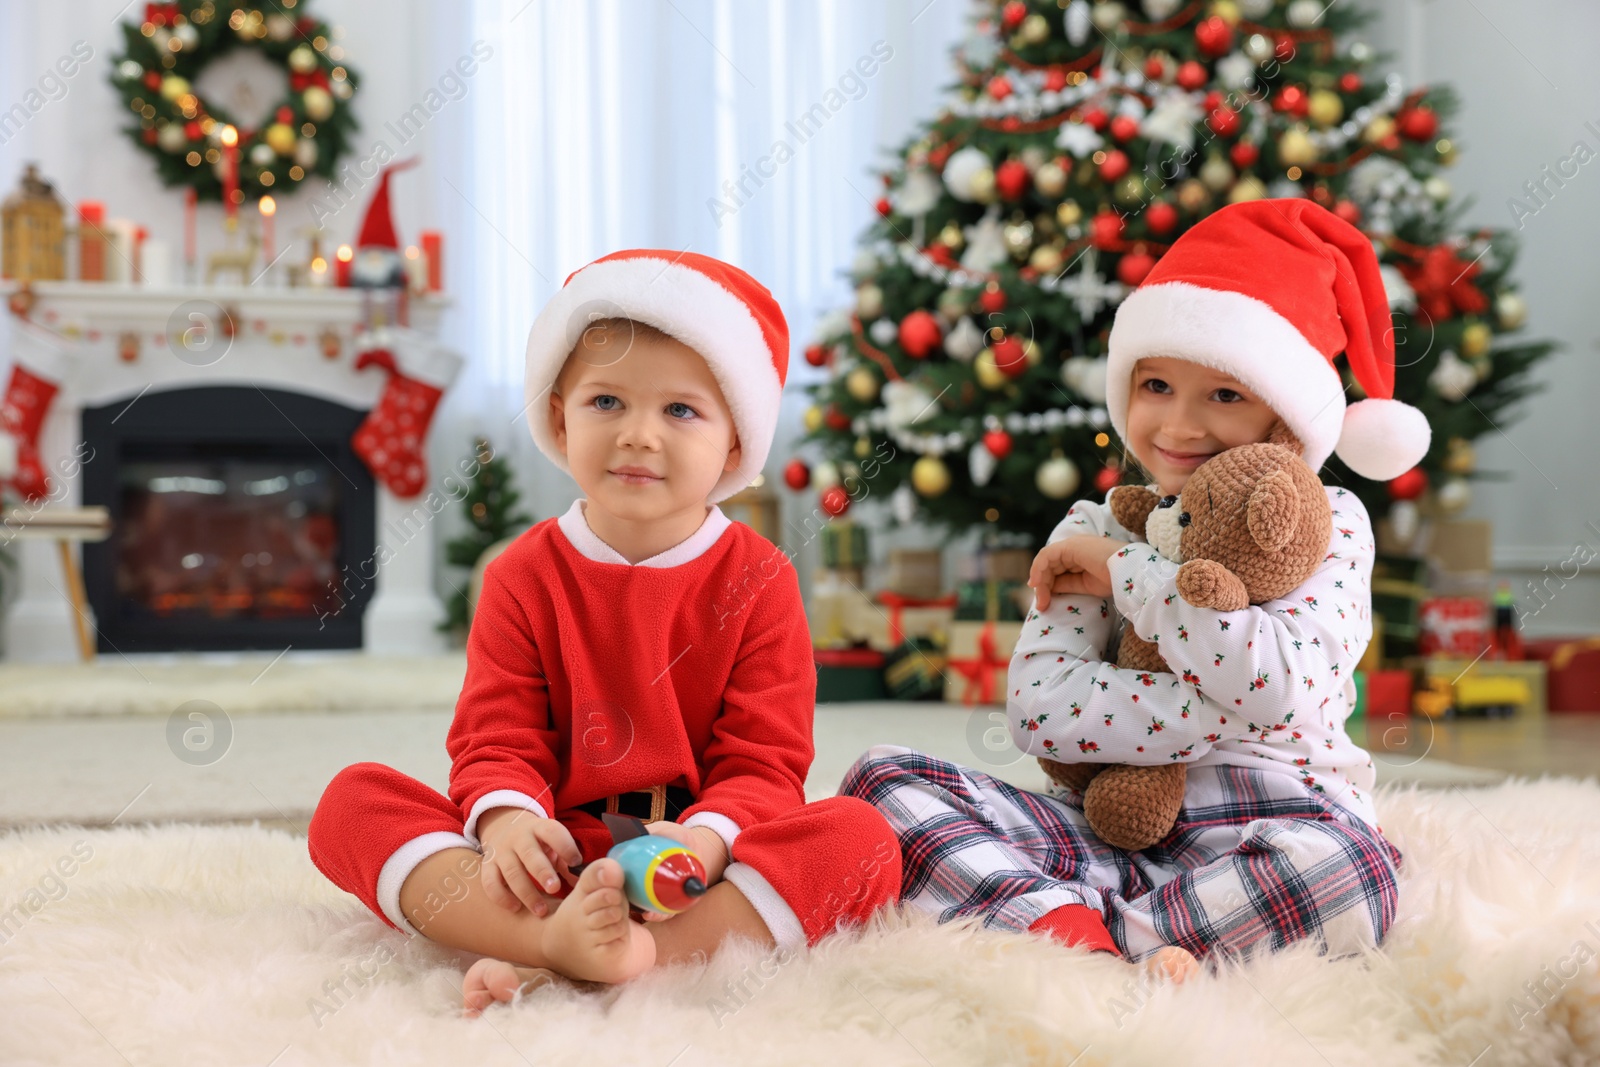 Photo of Cute little children with toys in room decorated for Christmas